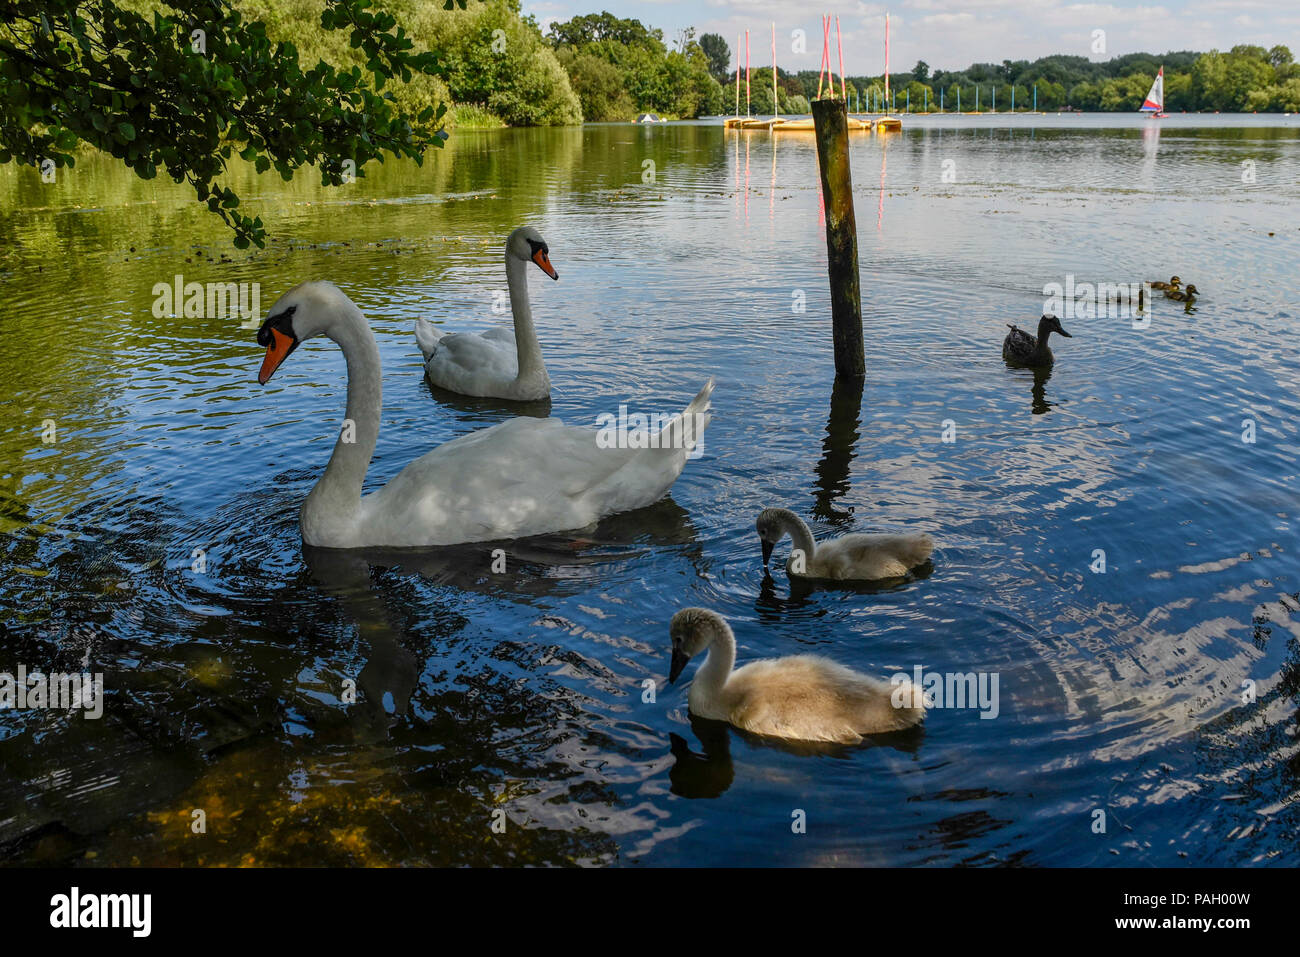 London, UK.  23 June 2018.  Swans and cygnets swim by during hot weather at Rickmansworth Aquadrome in north west London, on a day when temperatures reached 30C.  Temperatures up to 35C are forecast for the rest of the week during the current heatwave. Credit: Stephen Chung / Alamy Live News Stock Photo